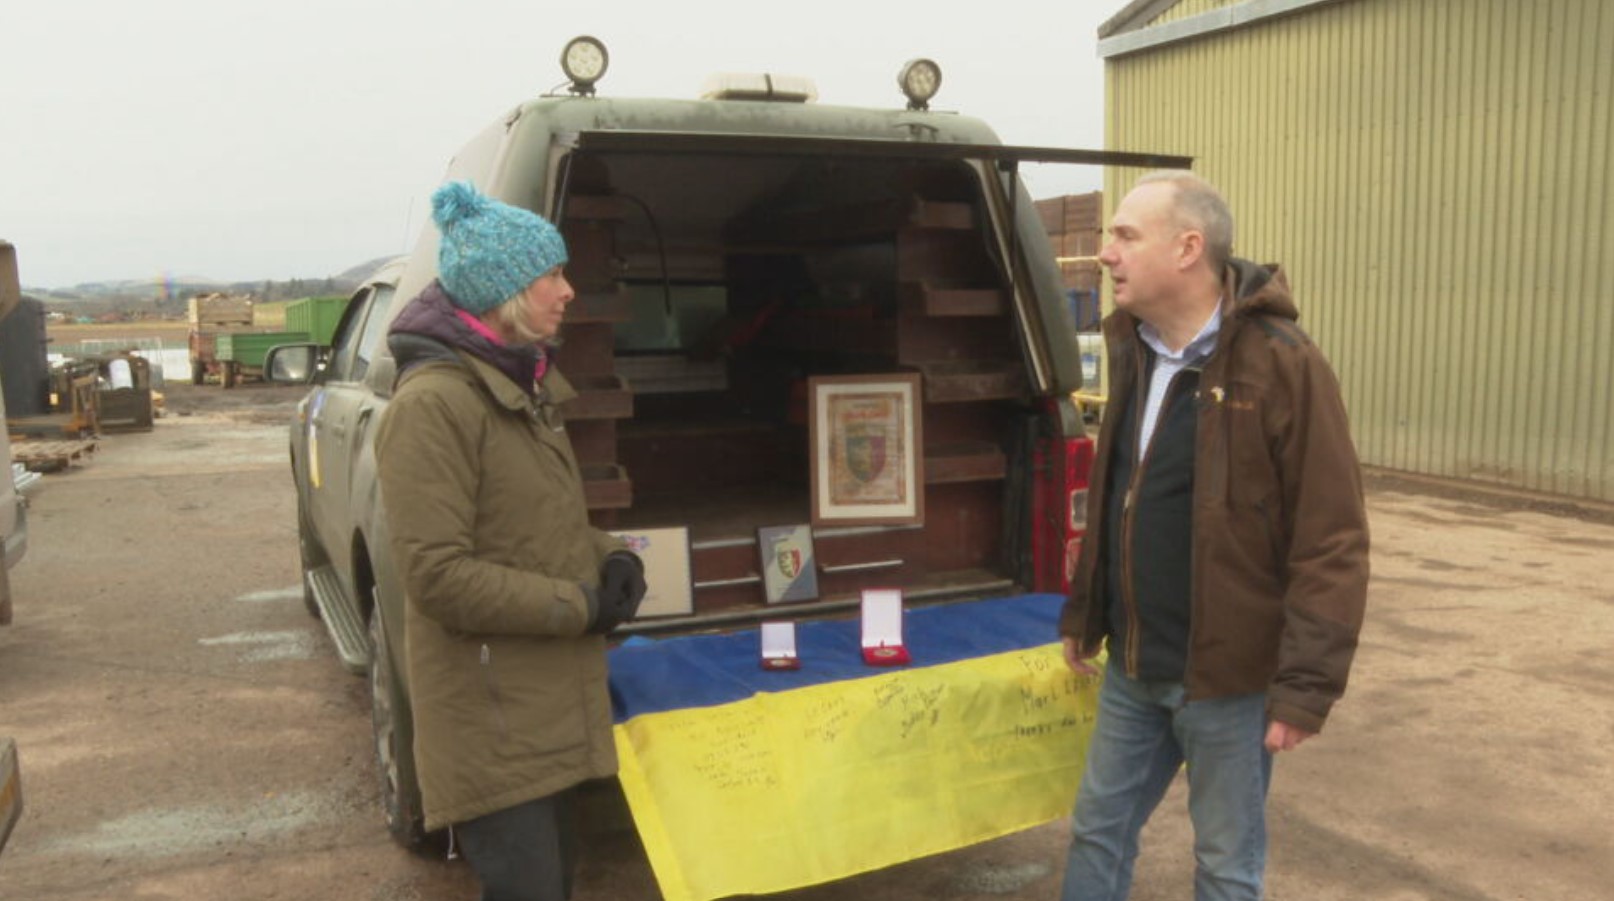 Aid is being sent to Ukraine to hand over to military and emergency services